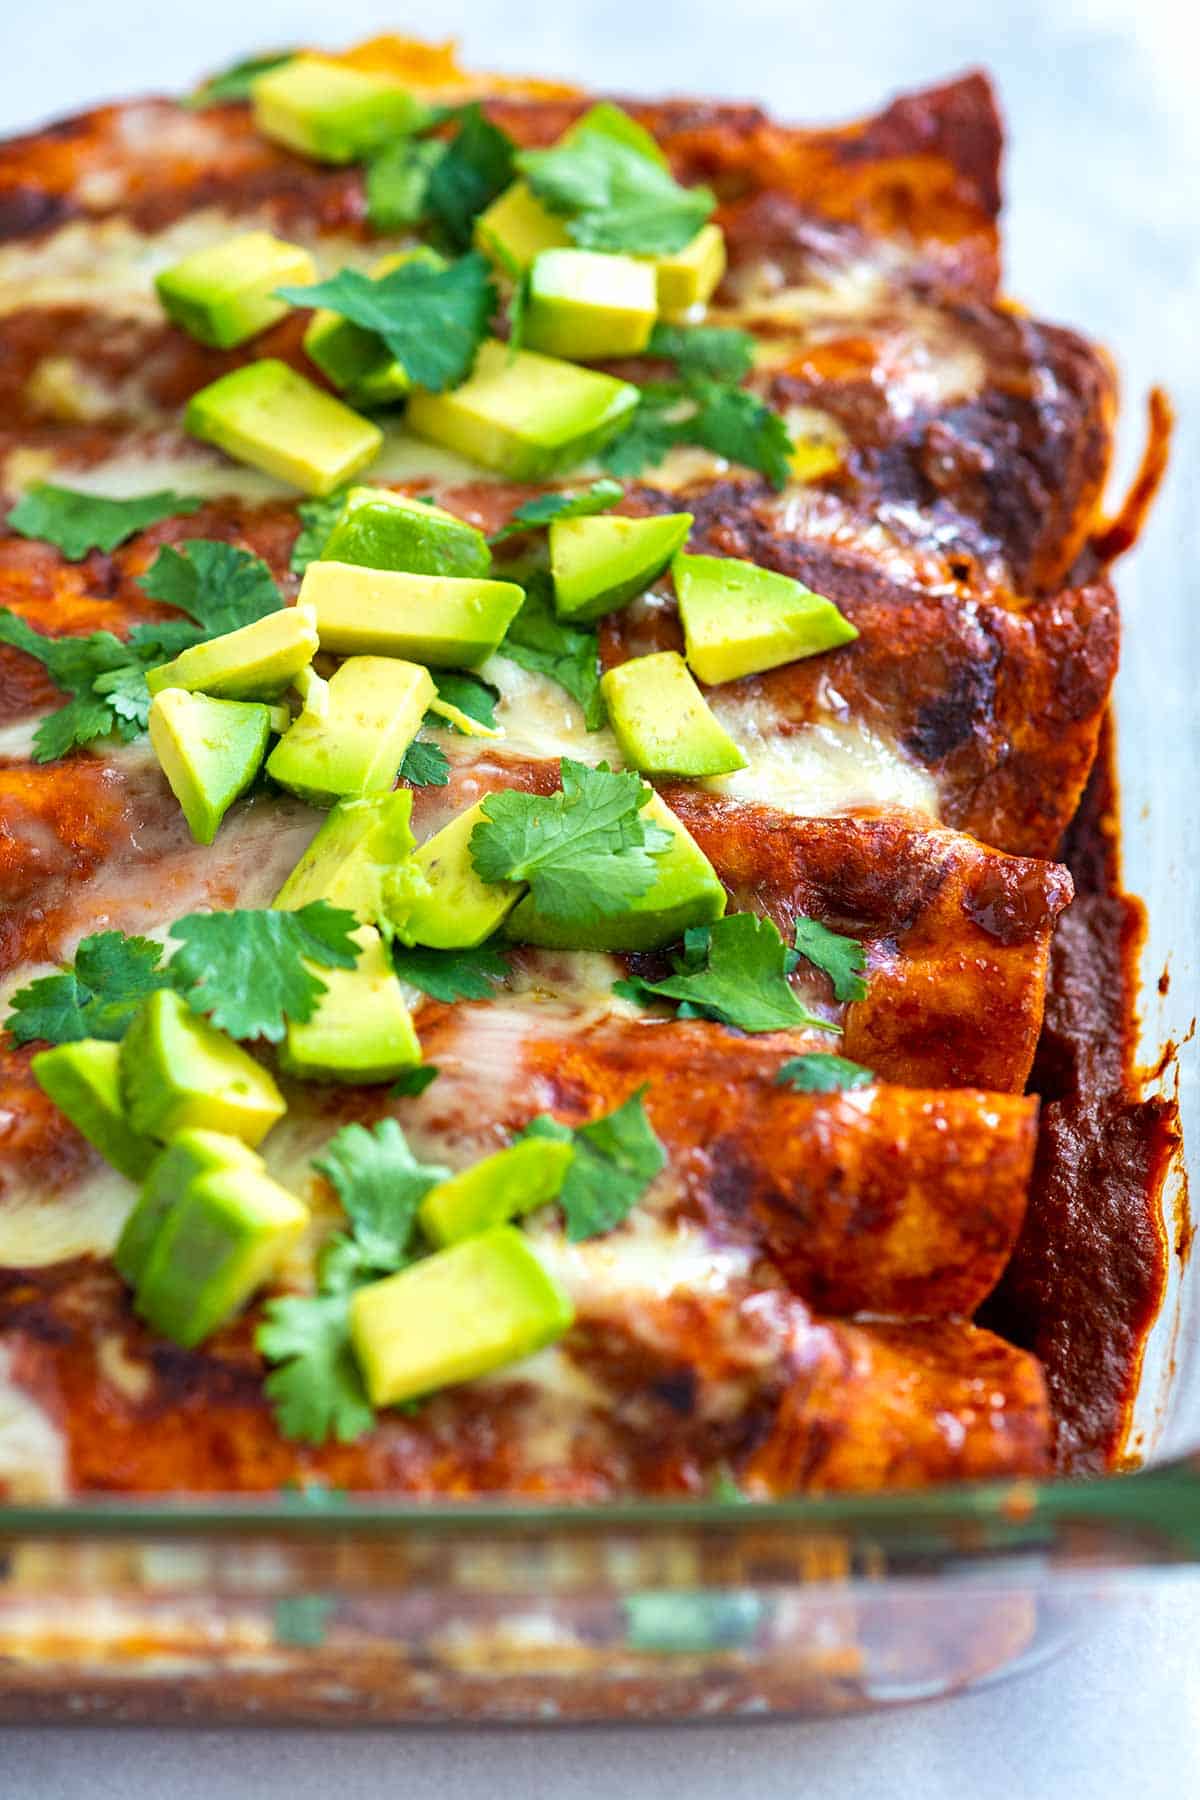 Chicken enchiladas with authentic red sauce